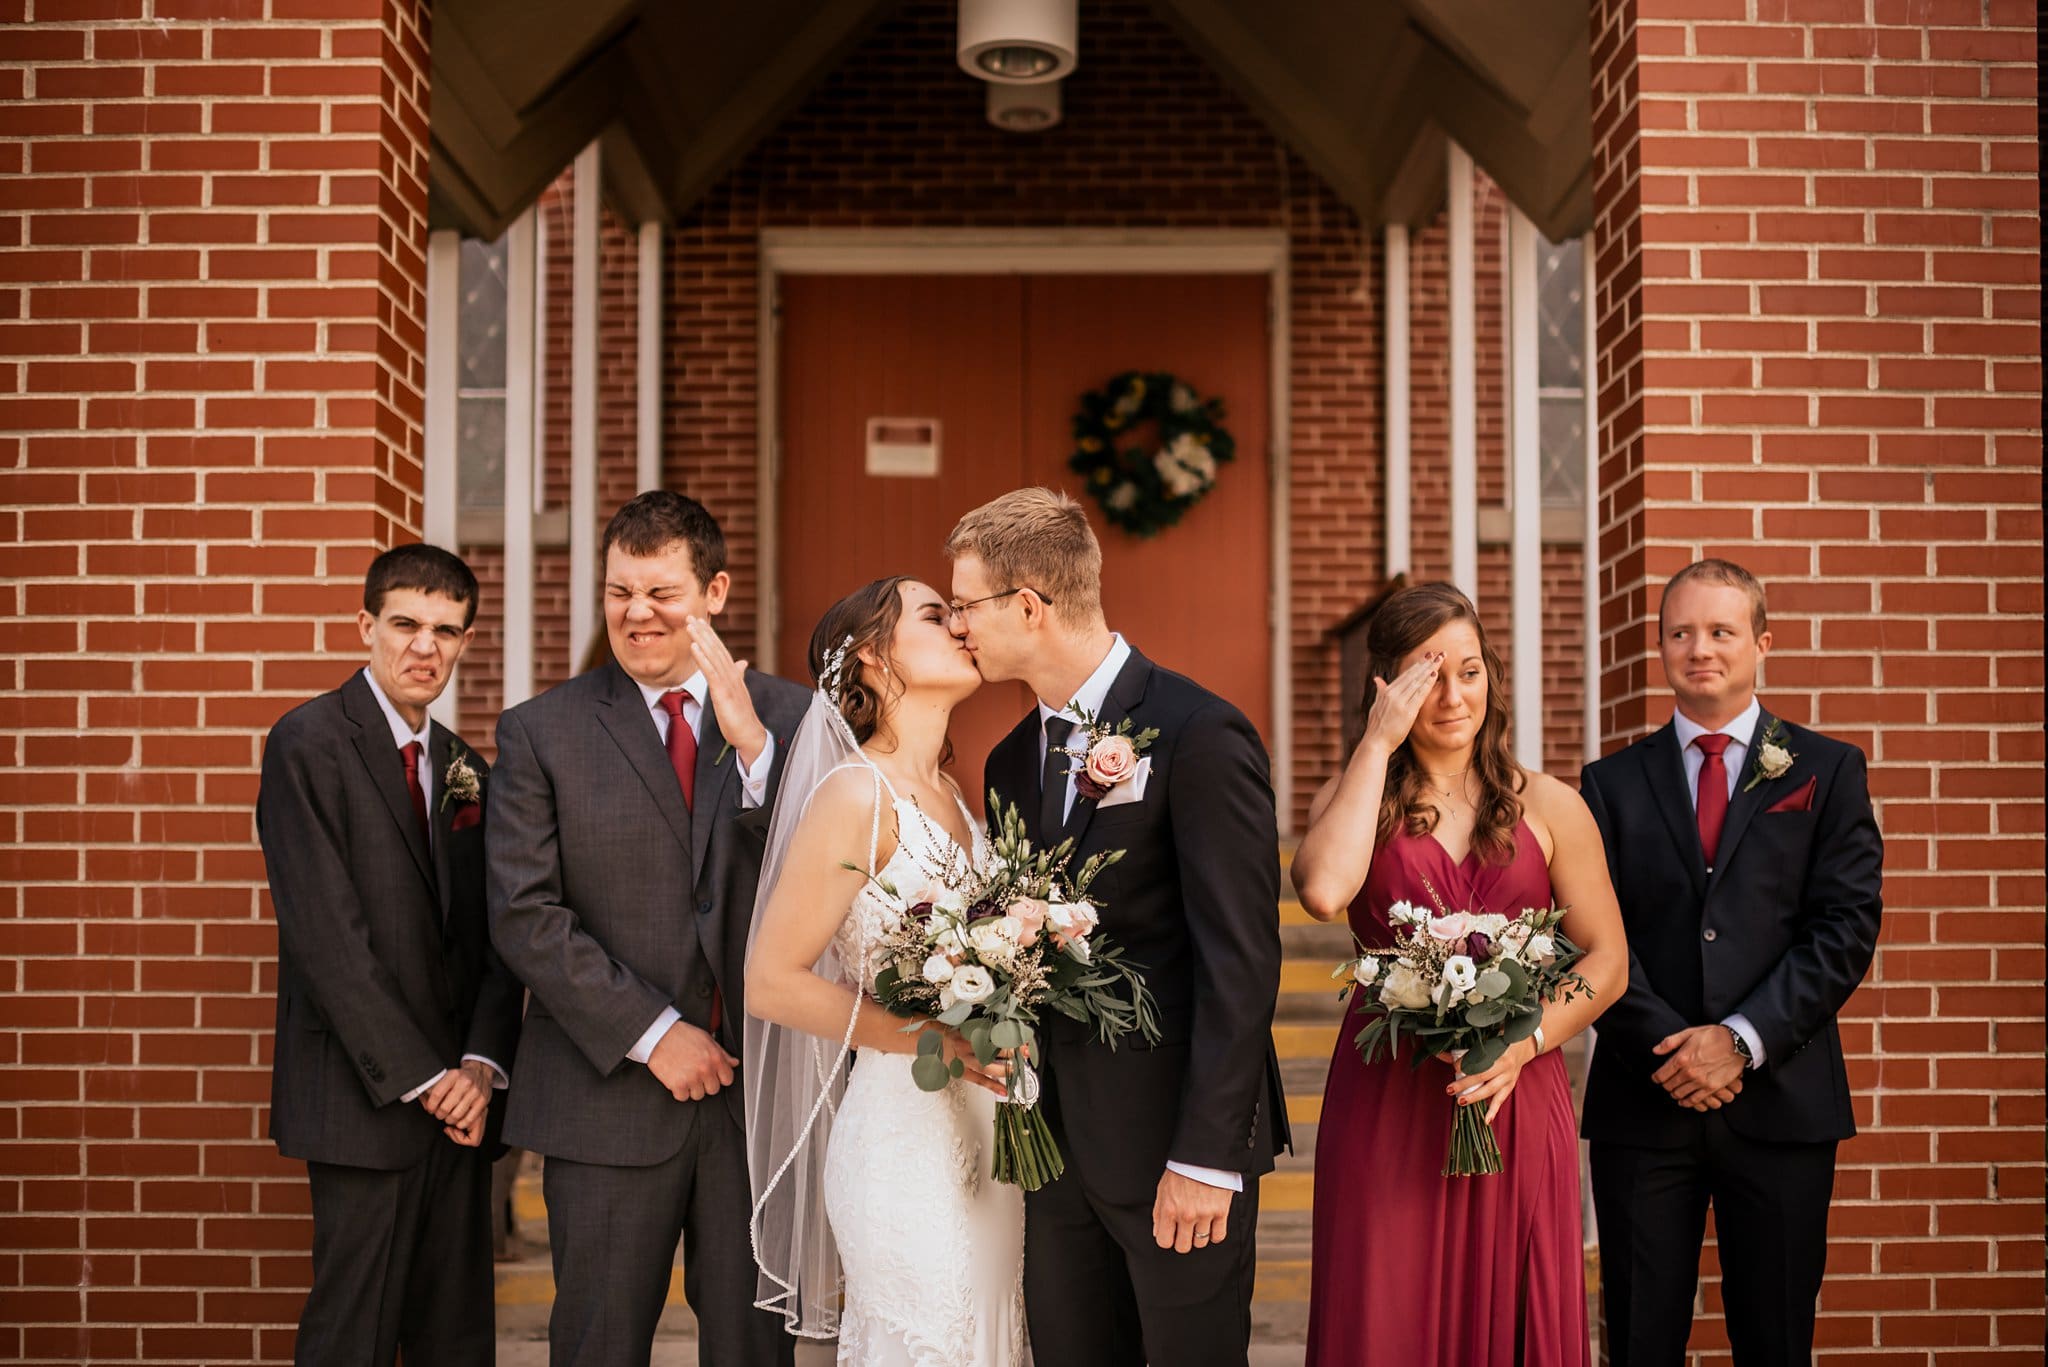 cranberry and dark gray wedding party